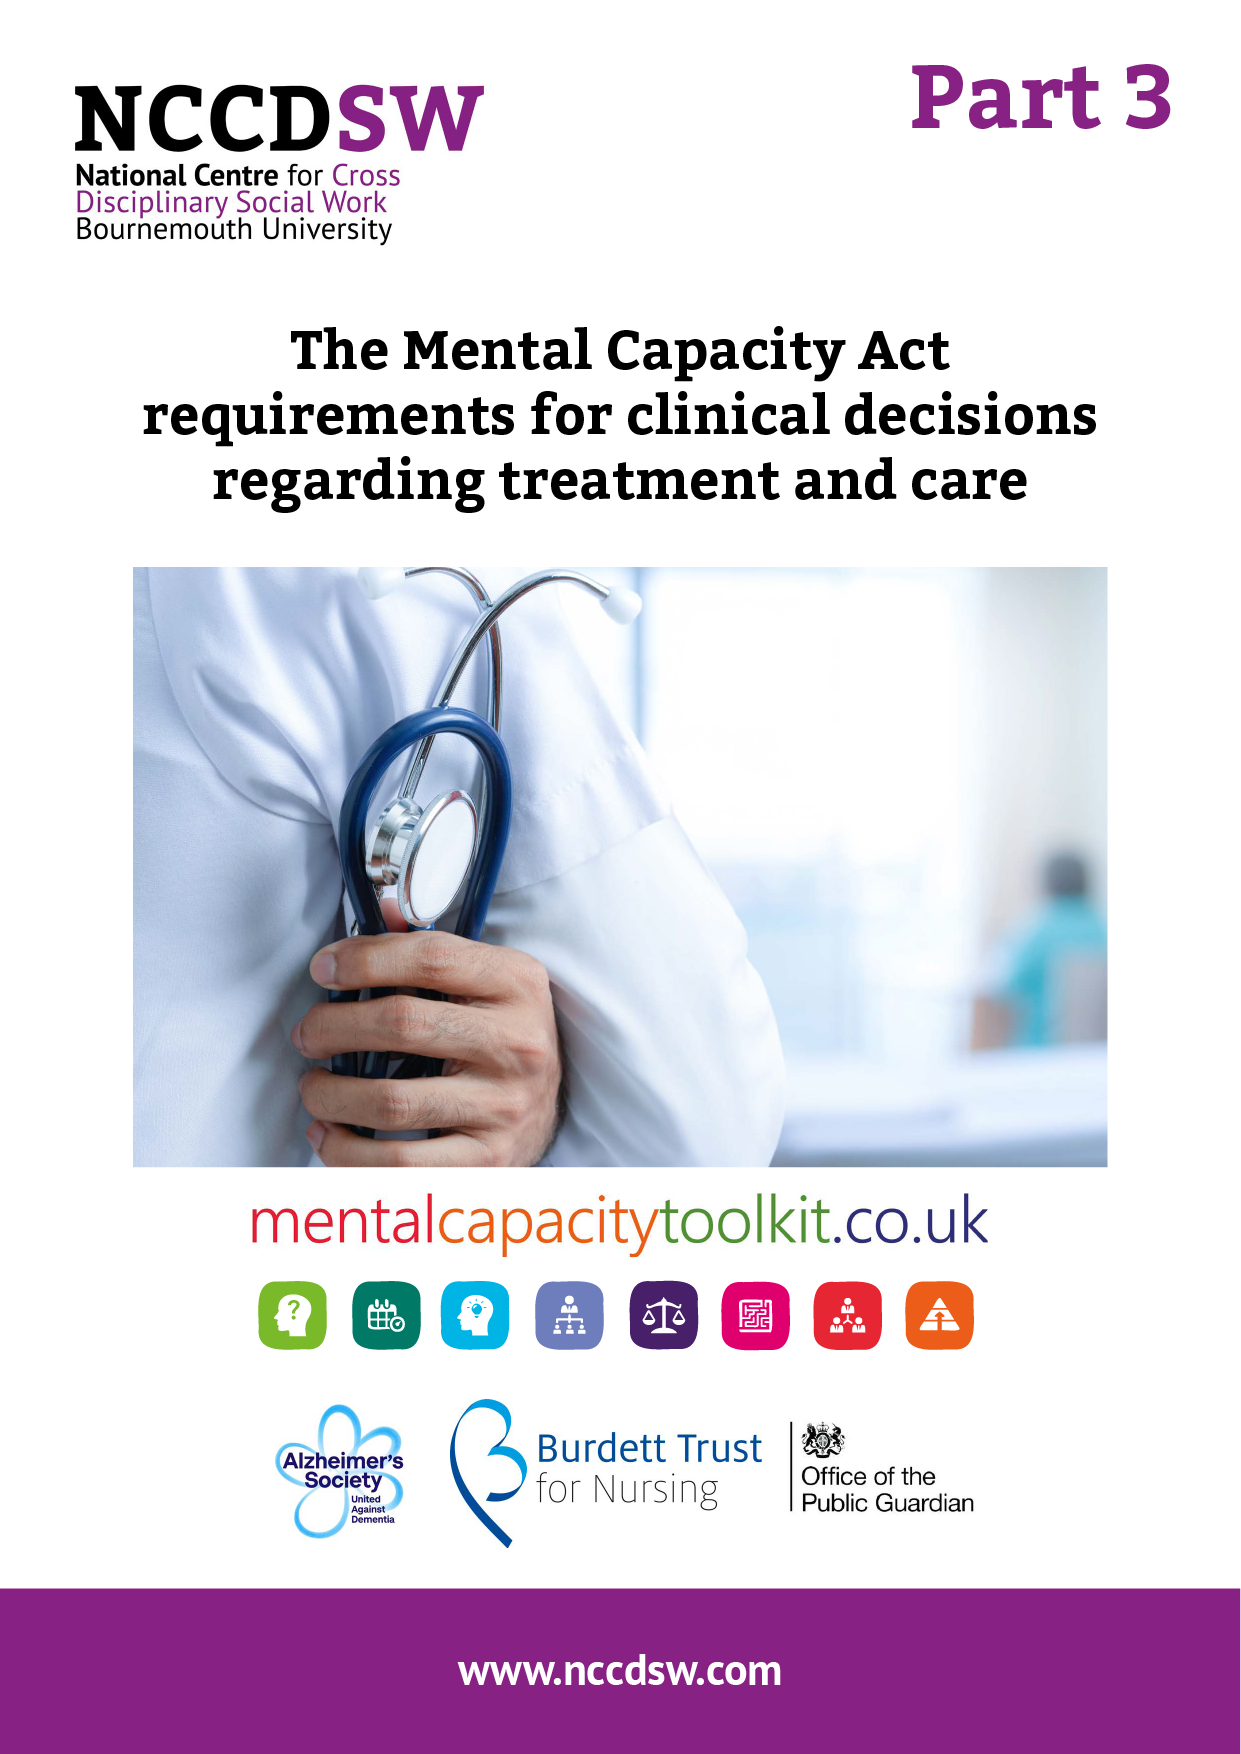 New Publication: The Mental Capacity Act requirements for clinical decisions regarding treatment and care